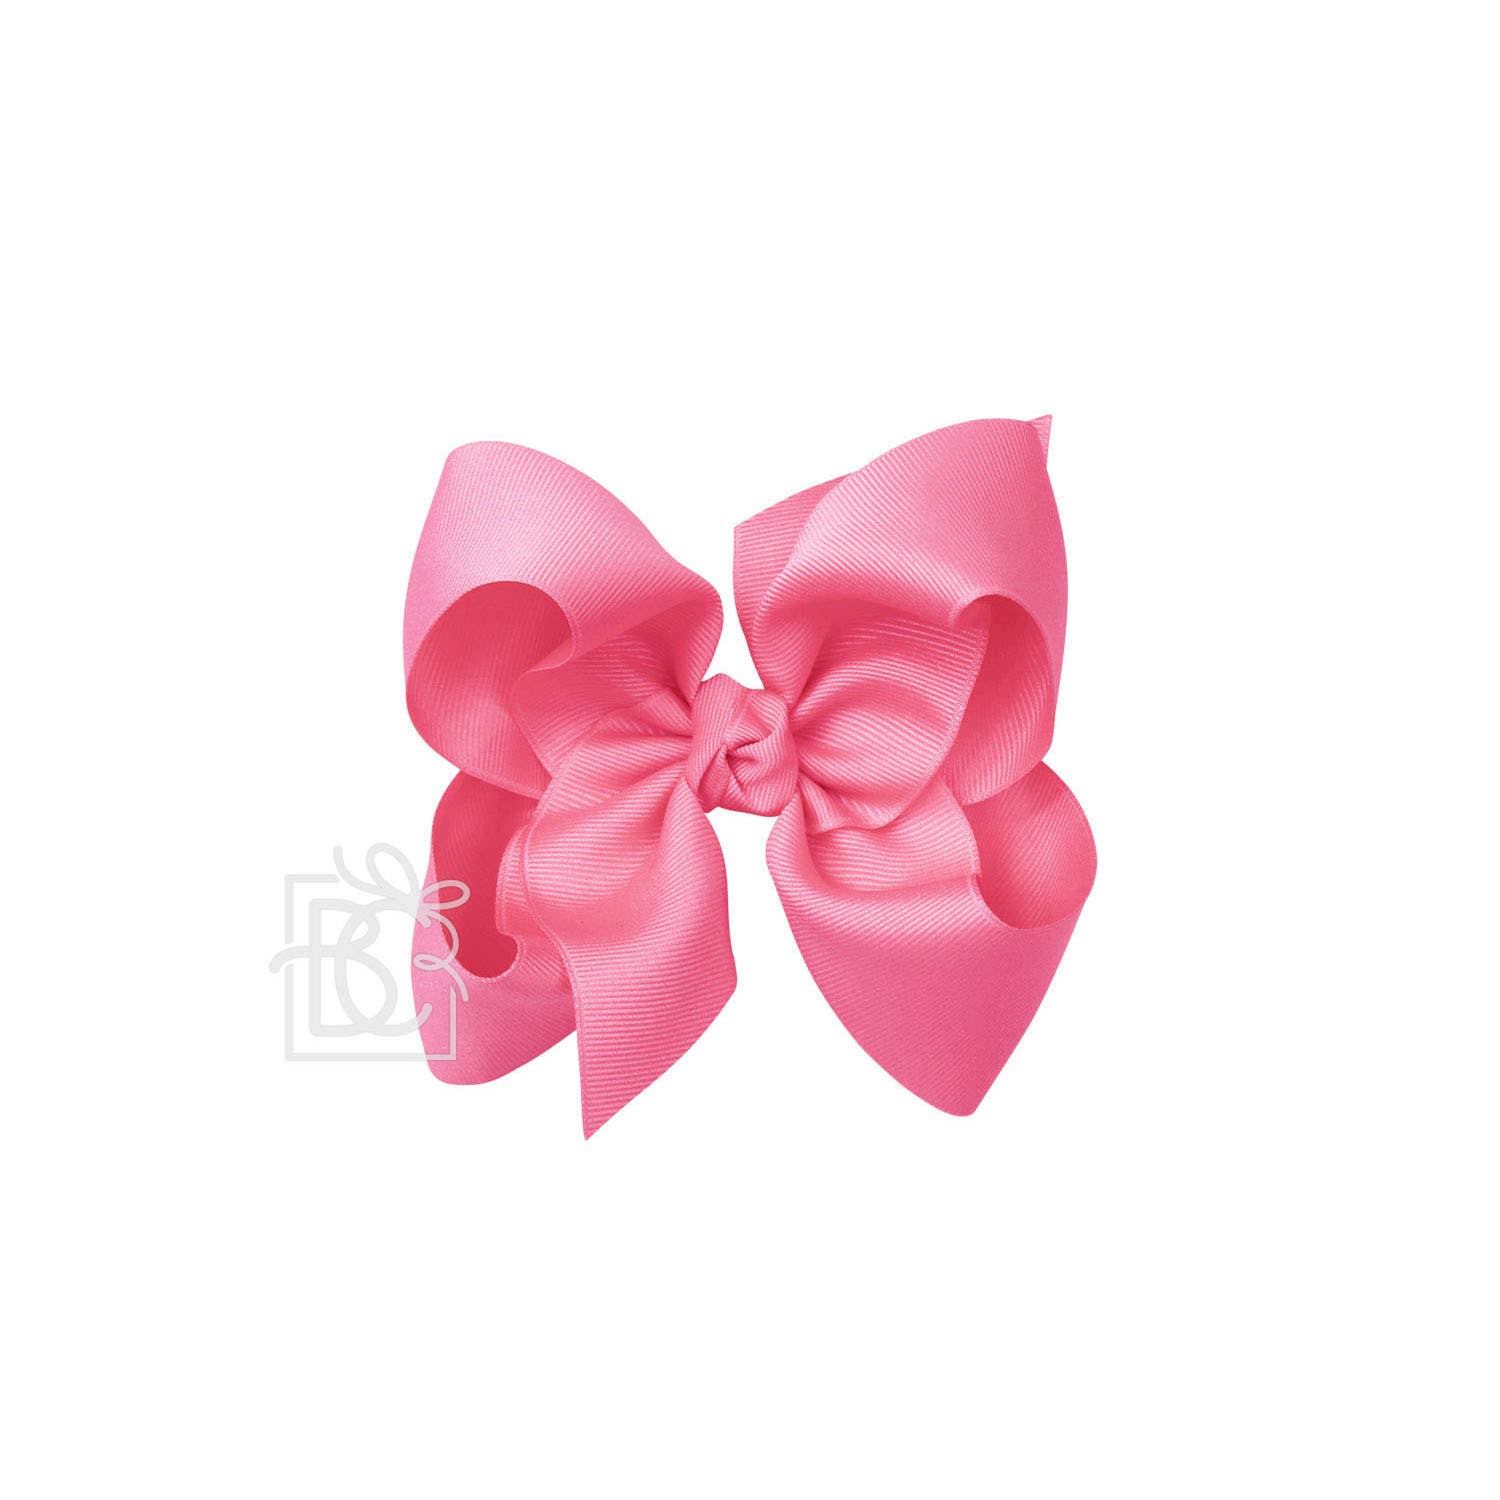 Signature Bow on Alligator Clip - Hot Pink